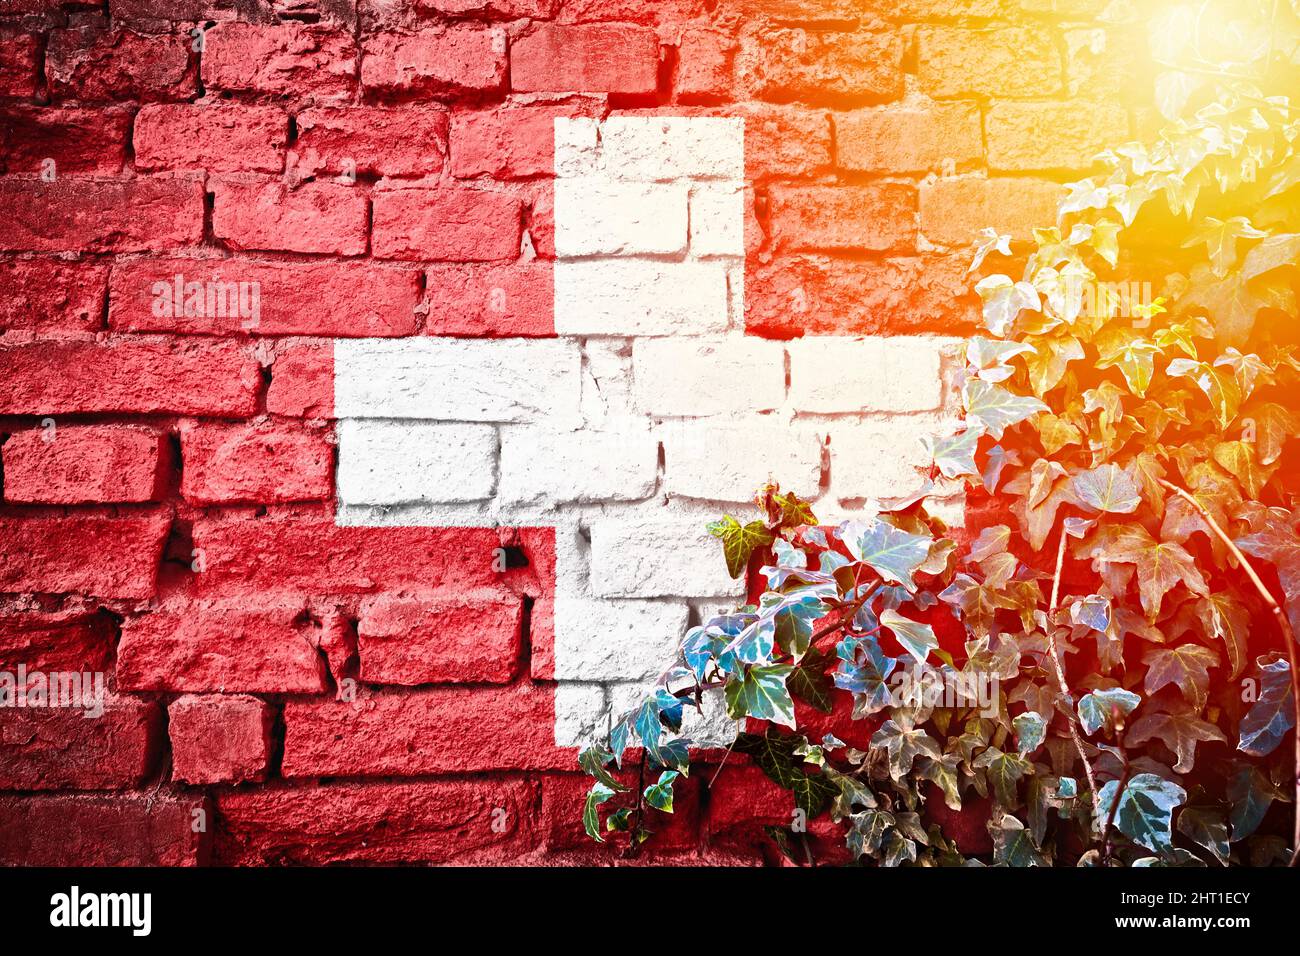 Switzerland grunge flag on brick wall with ivy plant sun haze view, country symbol concept Stock Photo